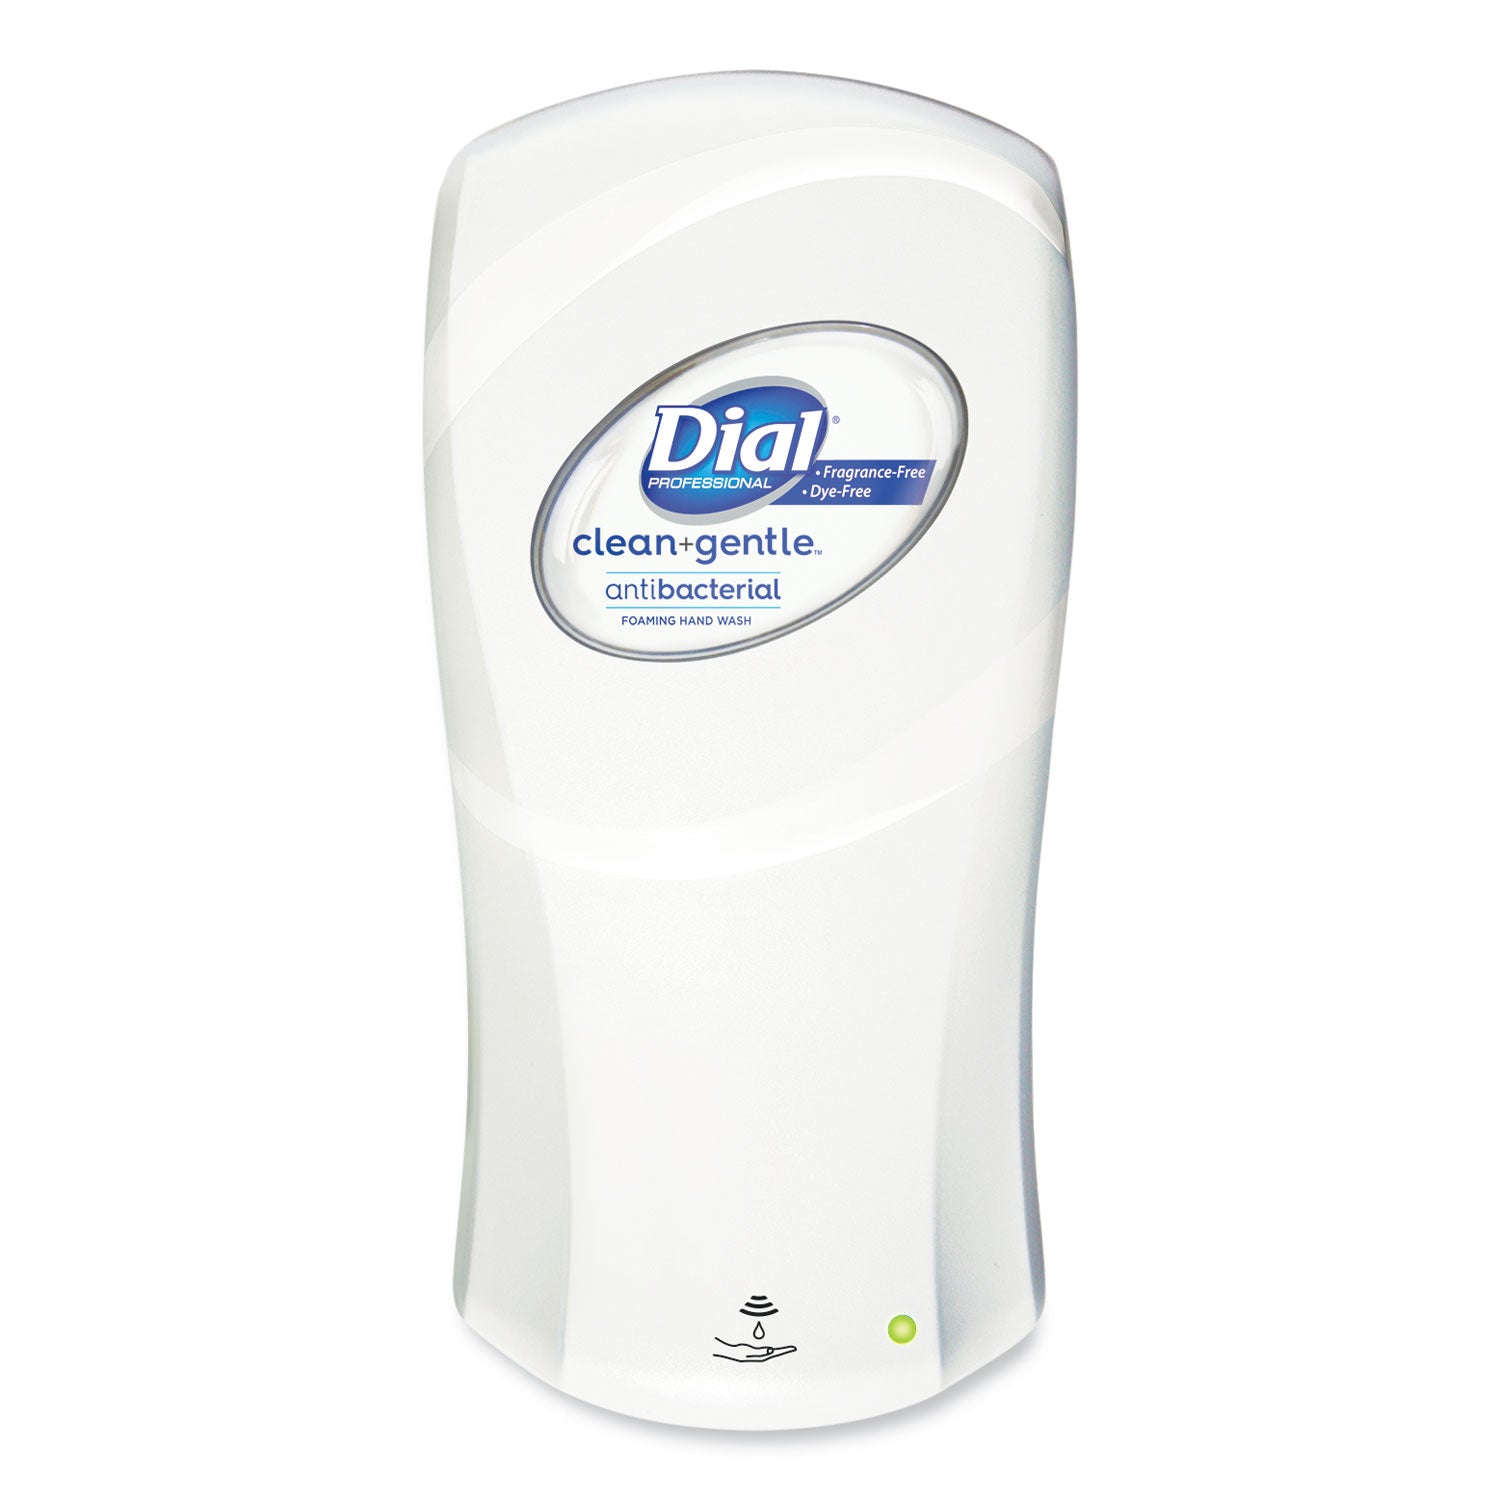 clean+gentle-antibacterial-foaming-hand-wash-refill-for-fit-touch-free-dispenser-fragrance-free-1-l-3-carton_dia32106ct - 2